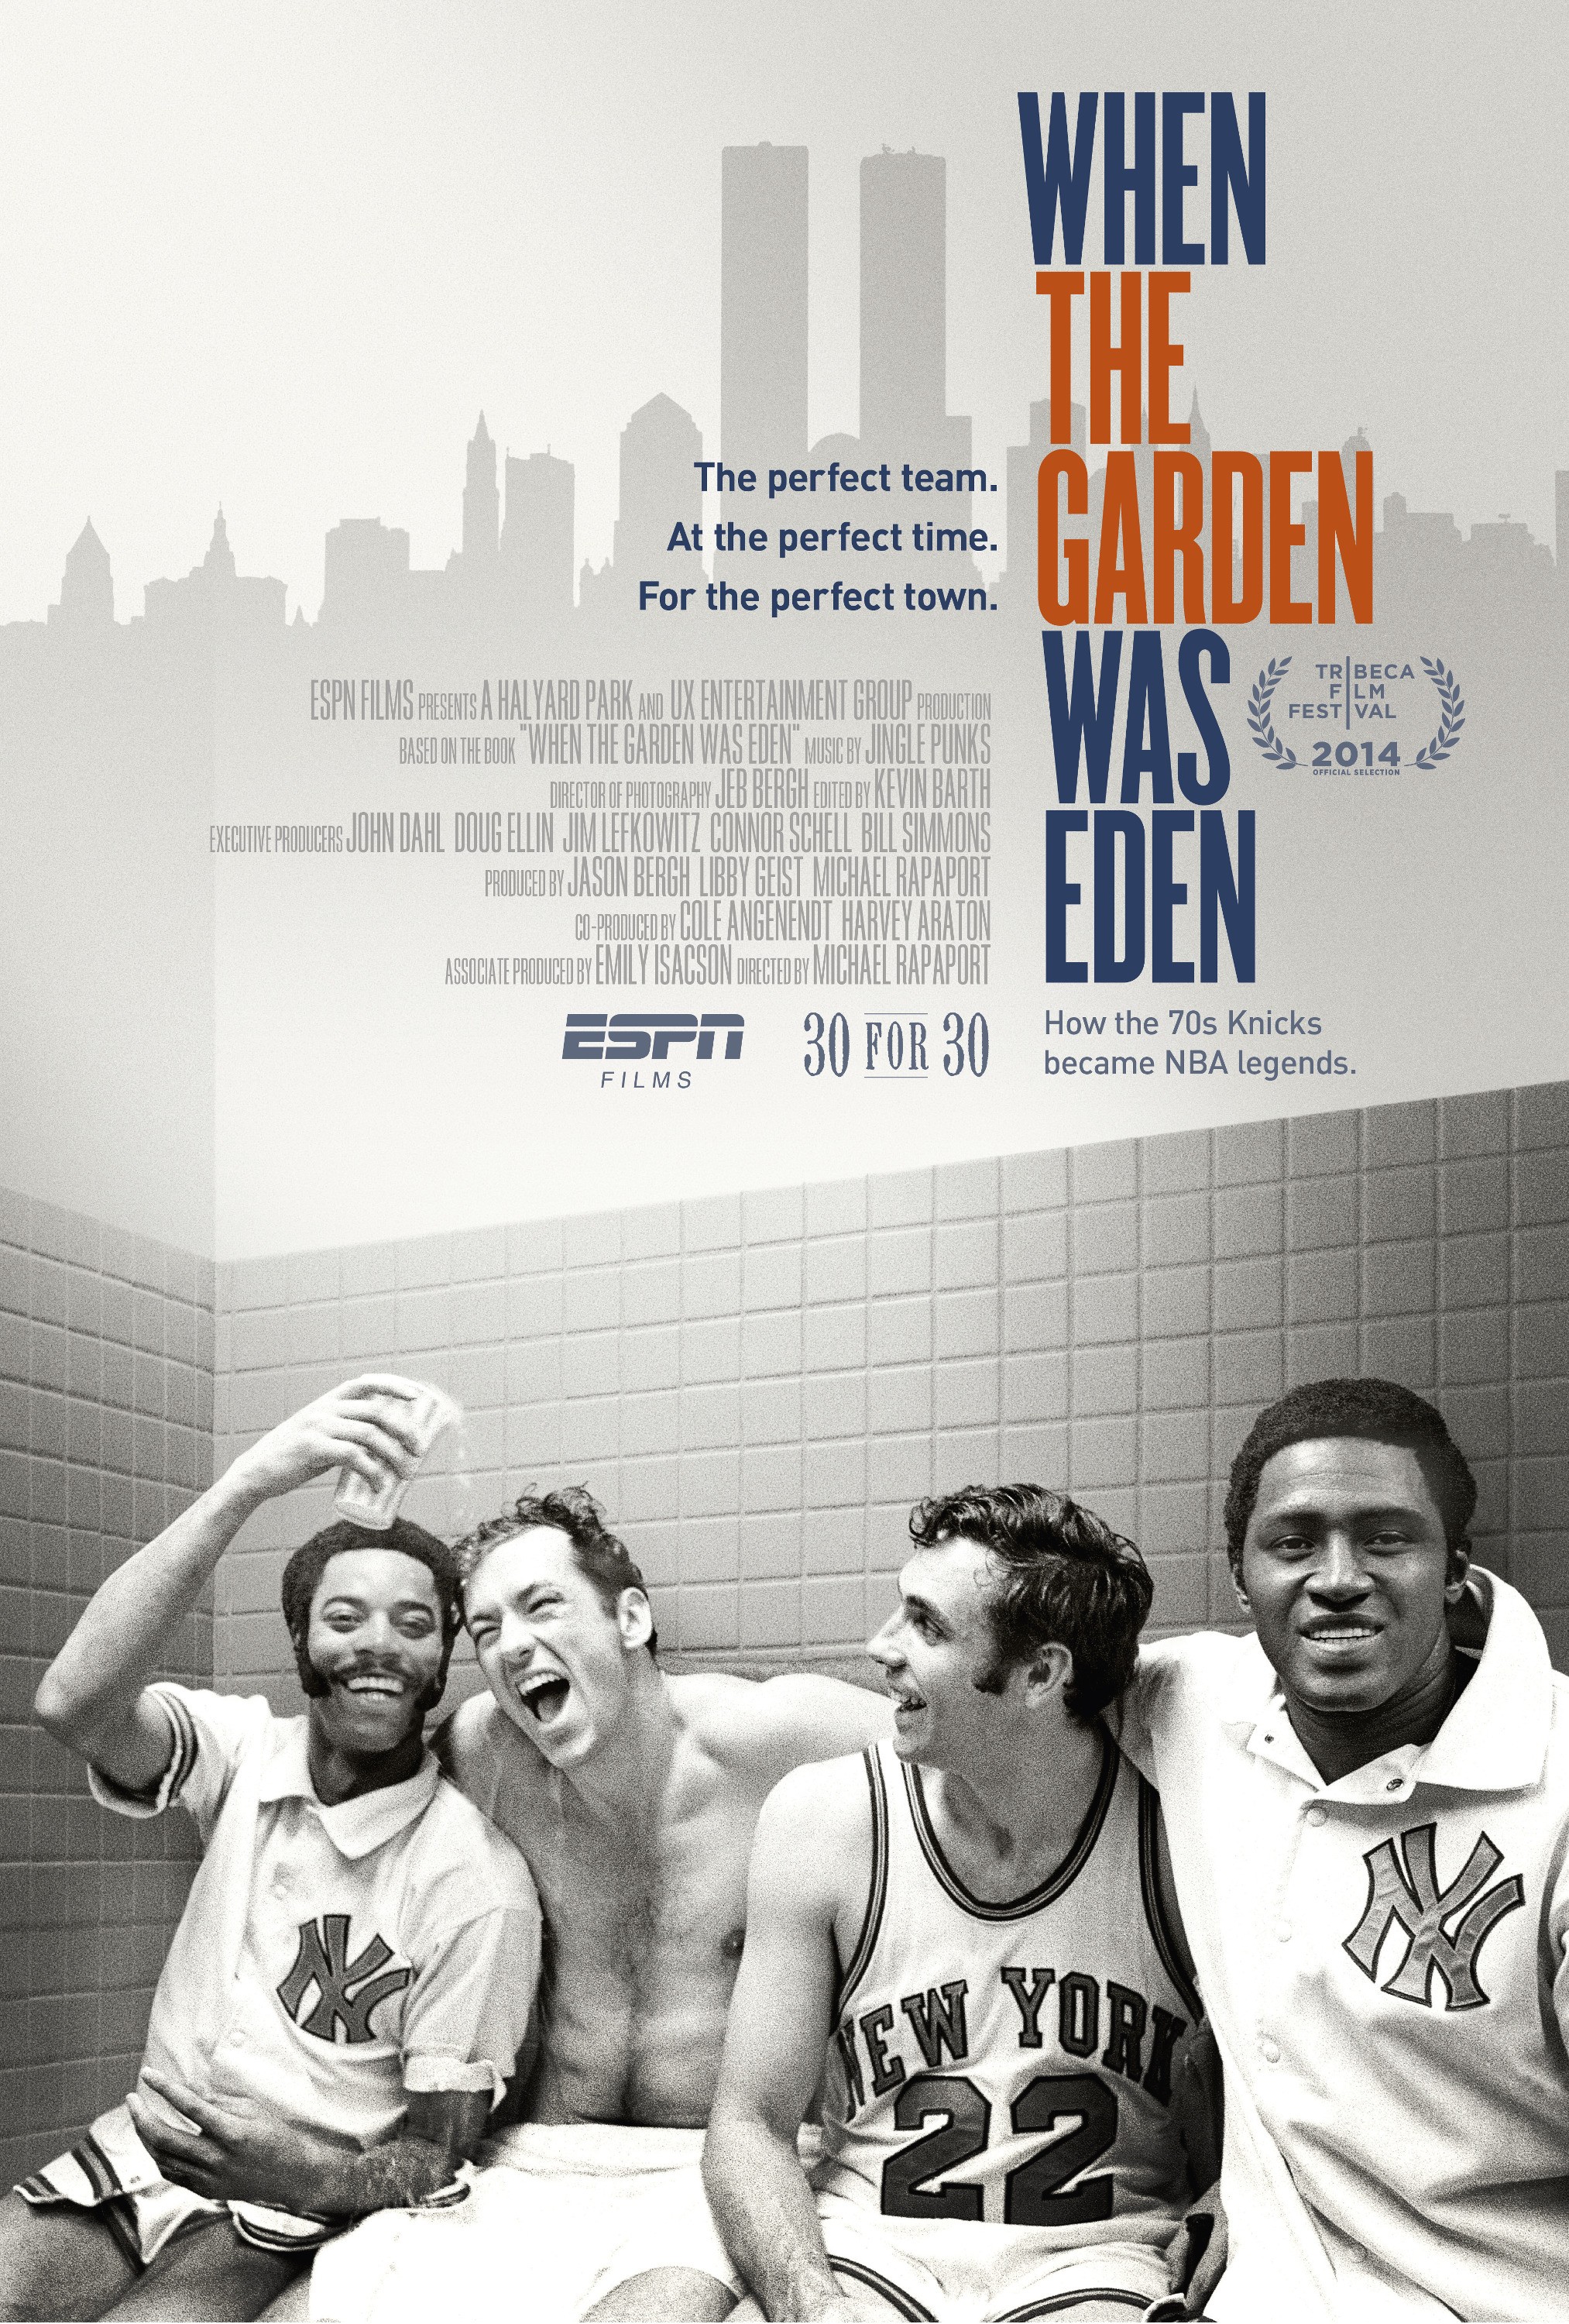 Mega Sized Movie Poster Image for When the Garden Was Eden 